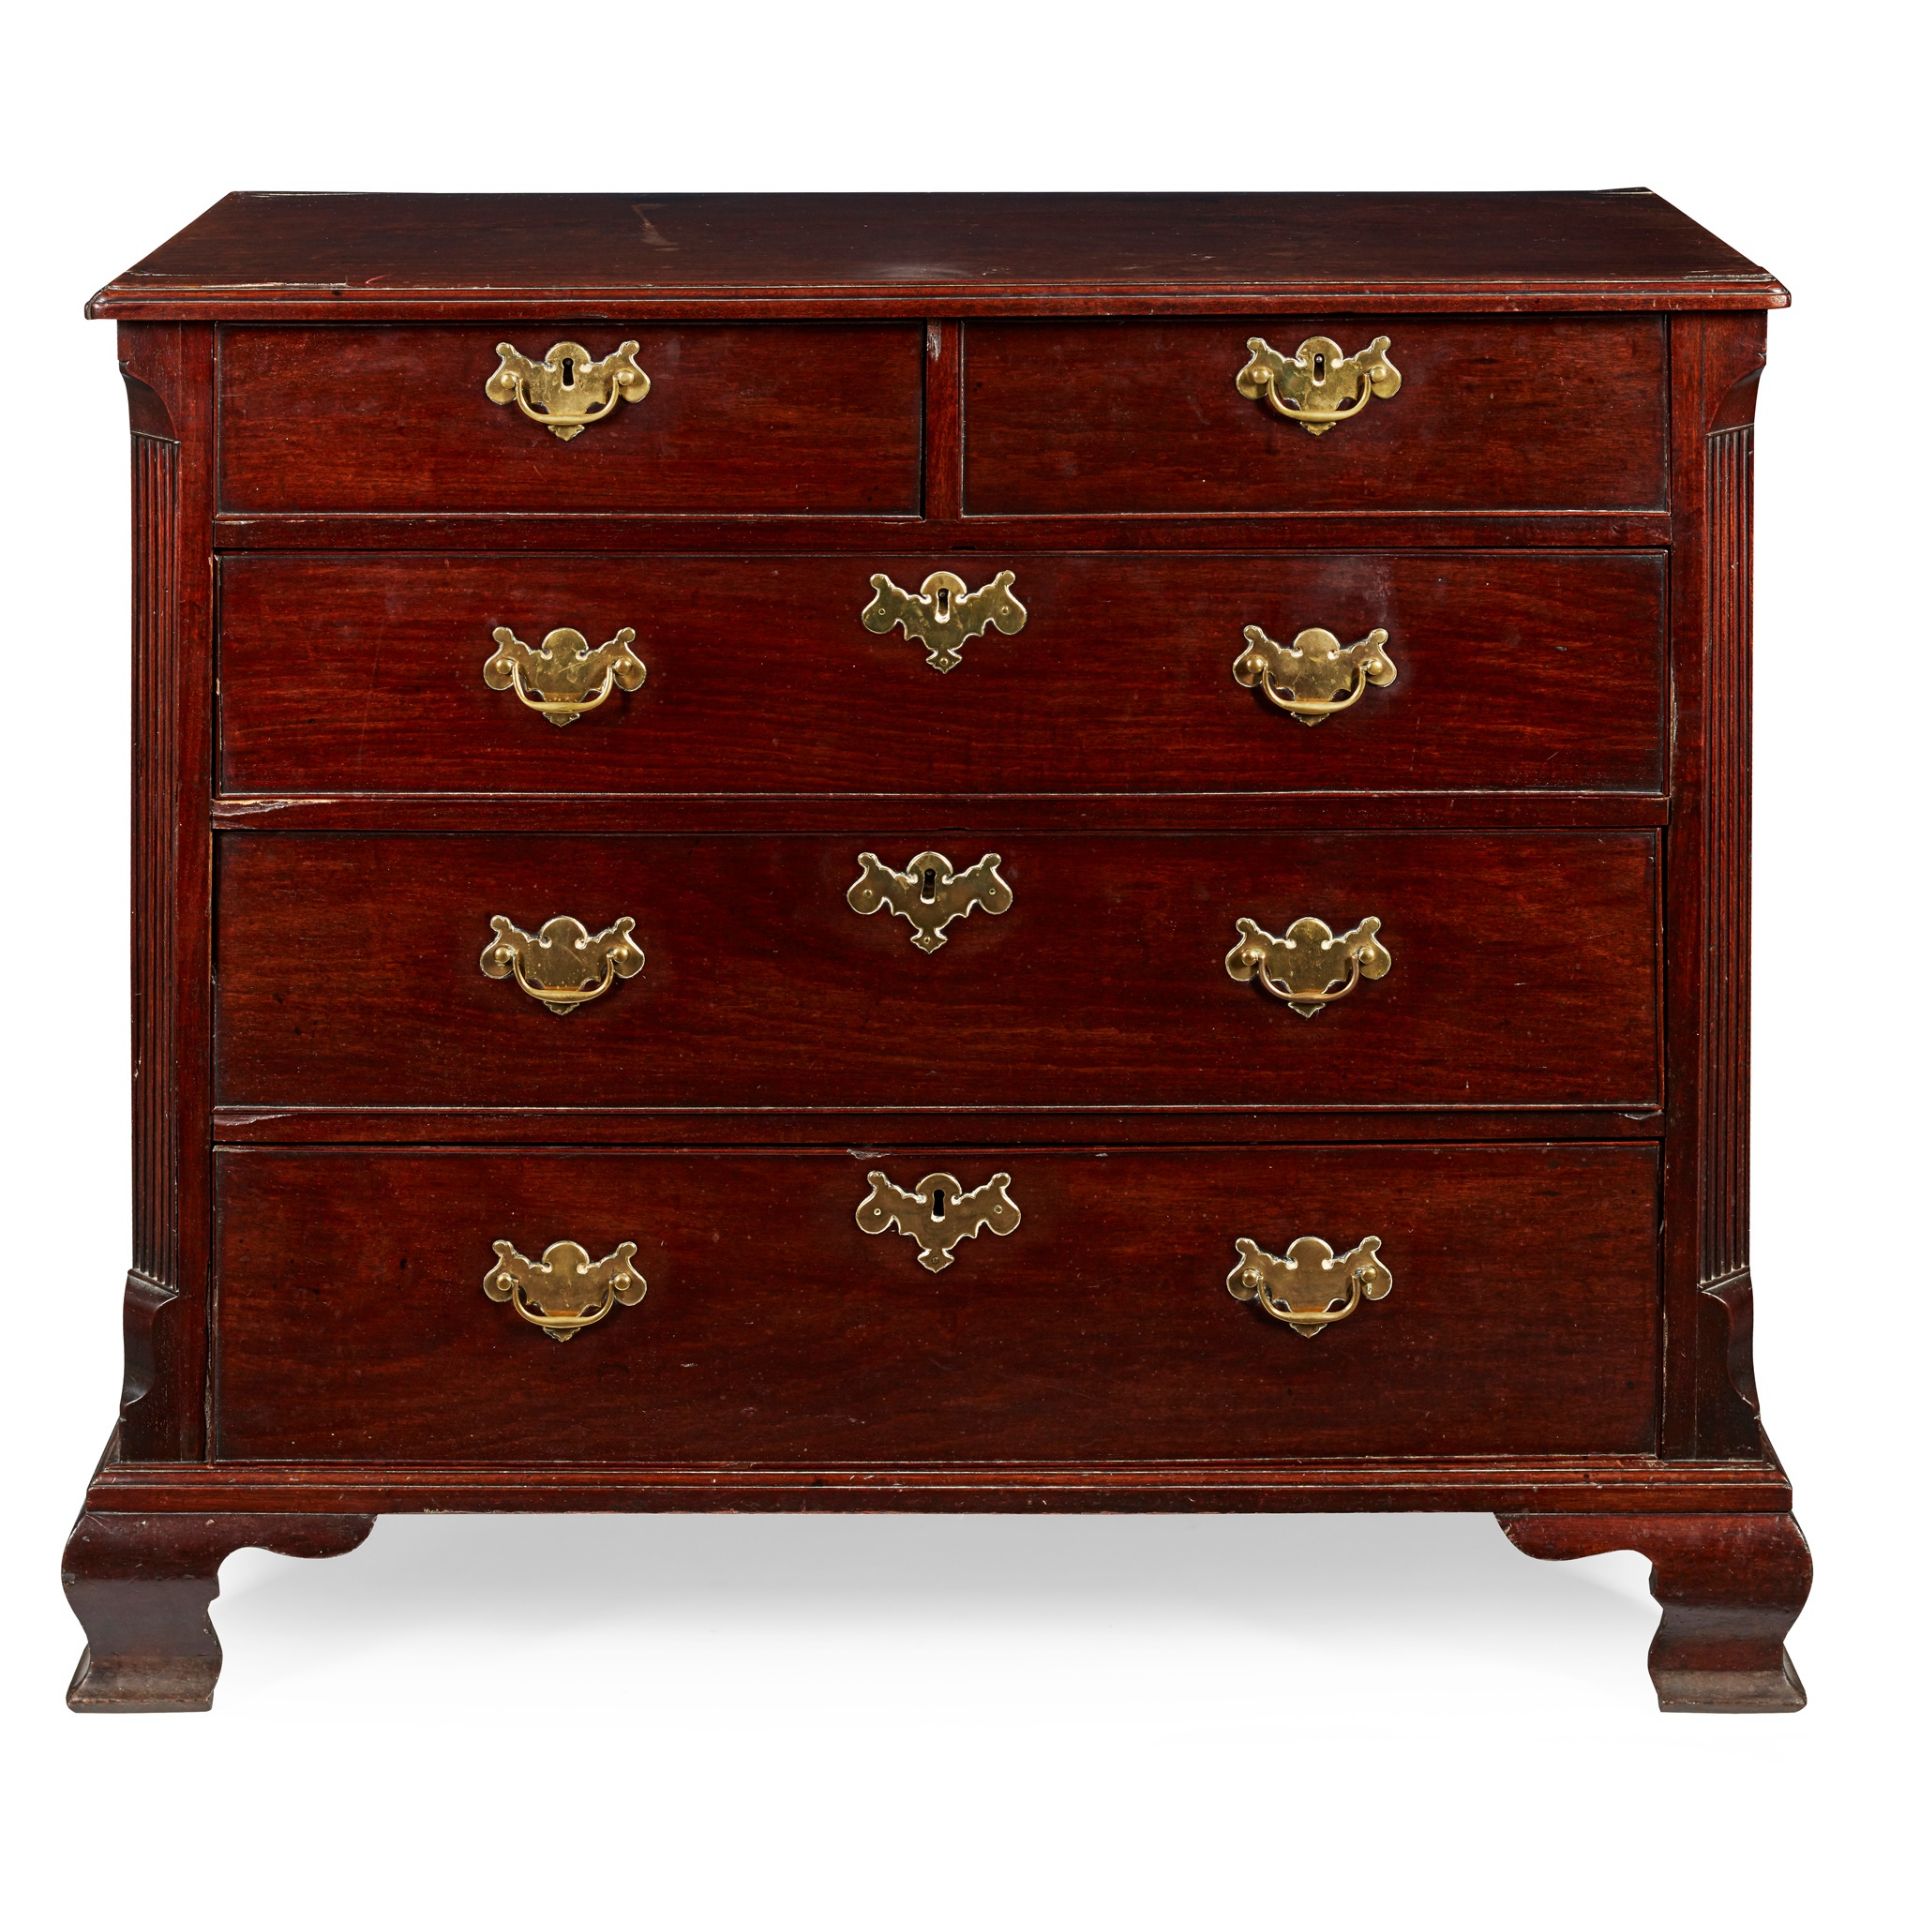 EARLY GEORGE III MAHOGANY CHEST OF DRAWERS 18TH CENTURY